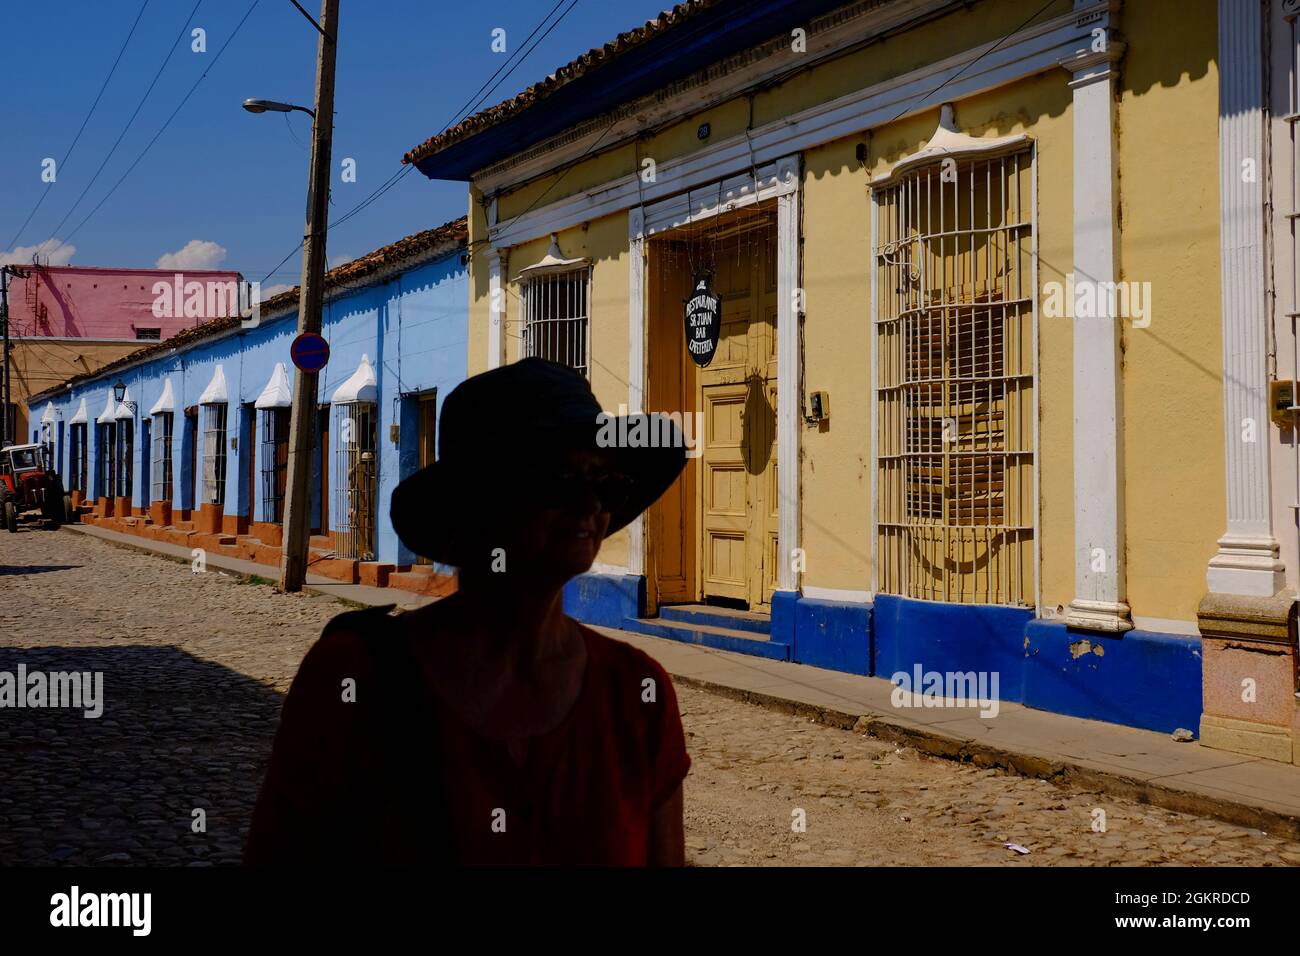 The silhouette of a woman on a quiet street, Trinidad, Sancti Spiritus, Cuba, West Indies, Central America Stock Photo